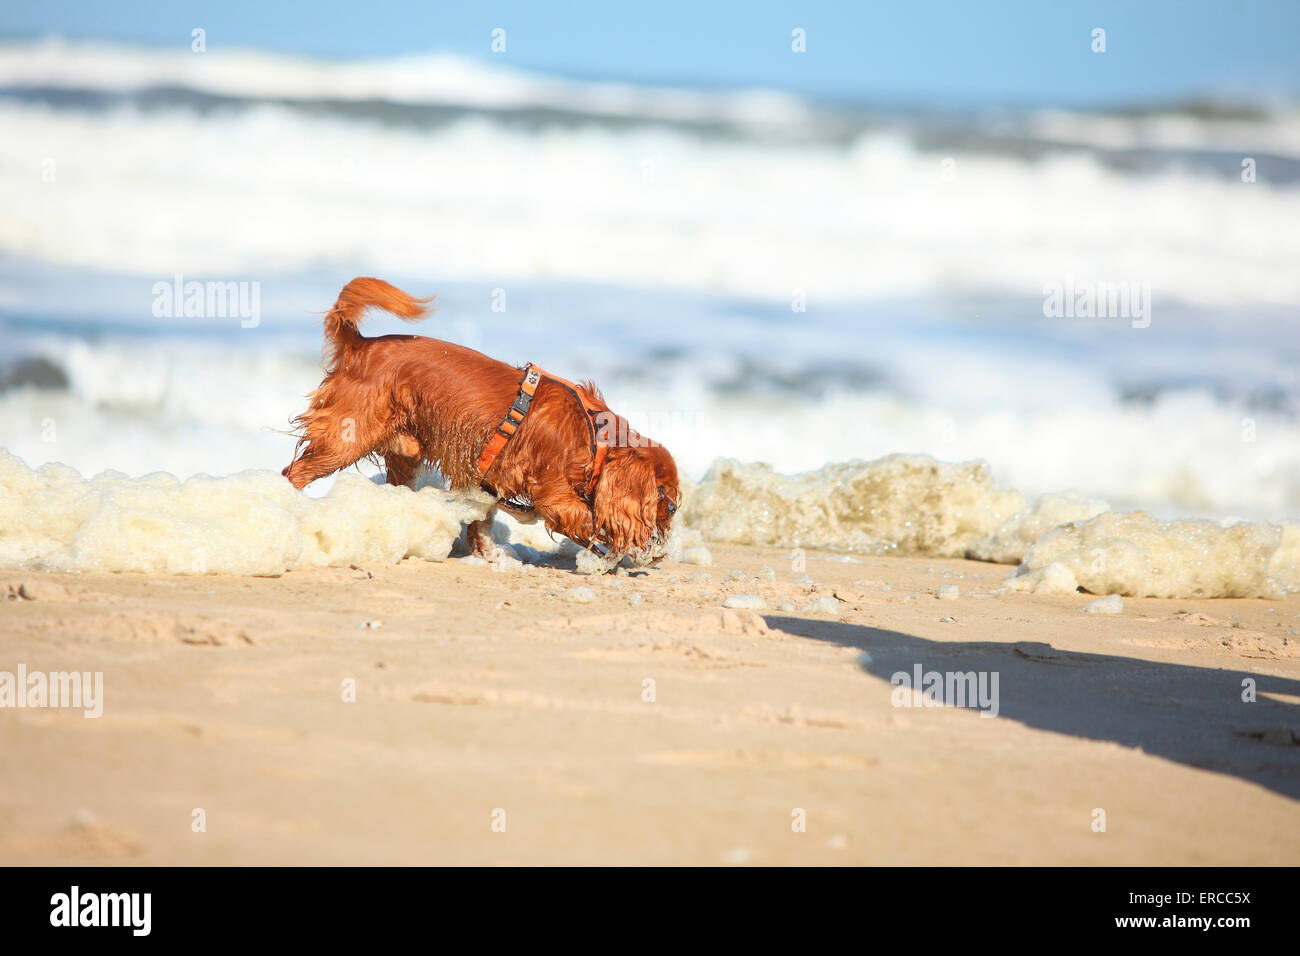 Cavalier King Charles Spaniel, homme, ruby, Texel, Pays-Bas|Cavalier King Charles Spaniel, Ruede, ruby, Texel, Pays-Bas Banque D'Images